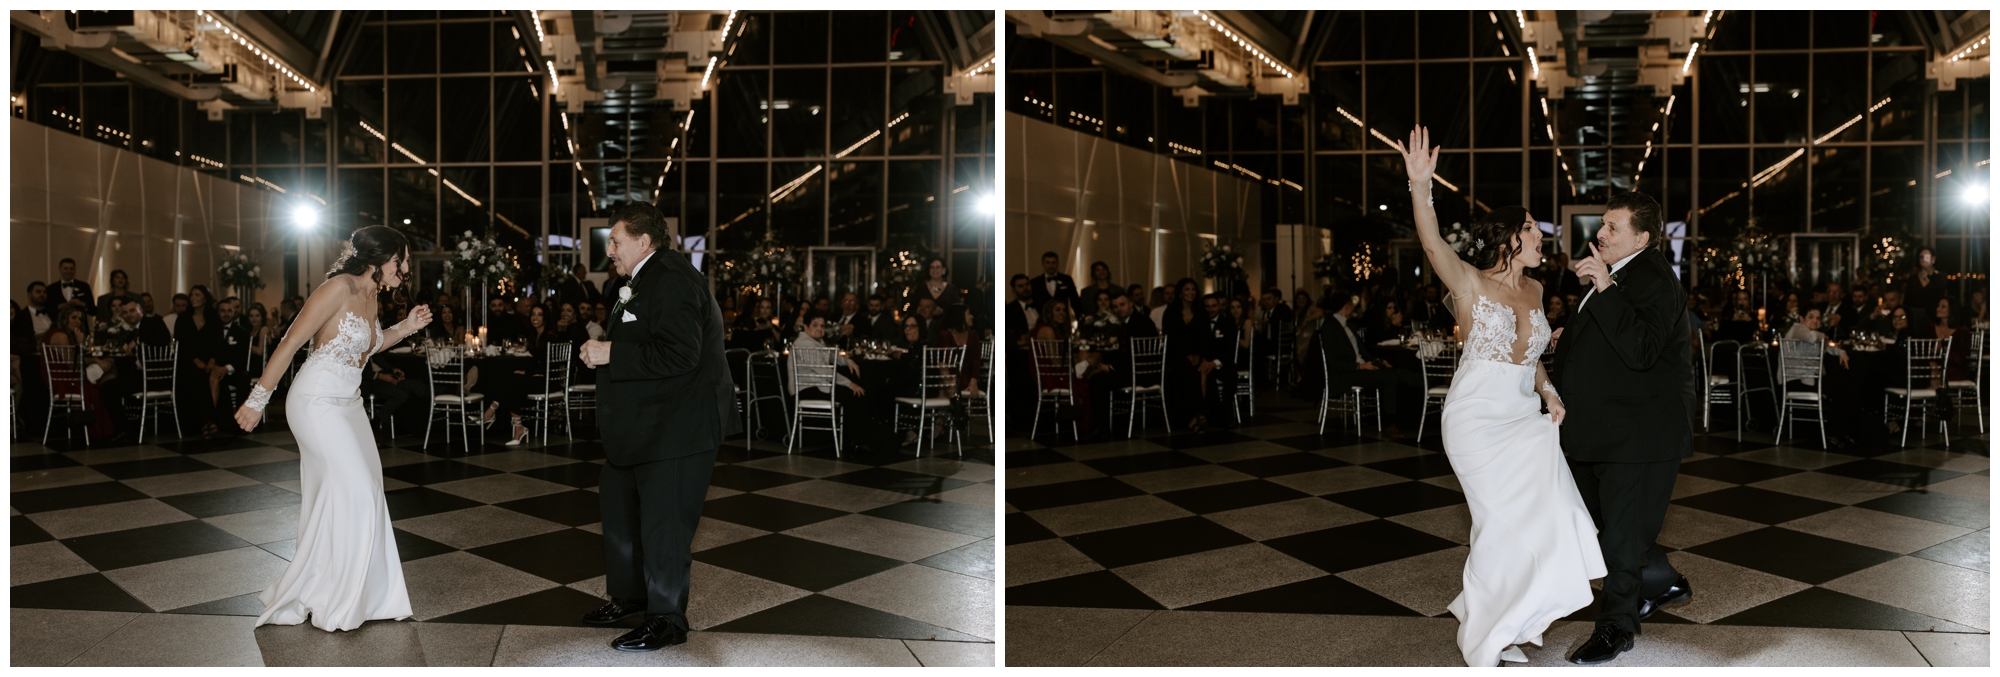 Wintergarden at PPG Place; wedding photographed by Mariah Treiber Photography 